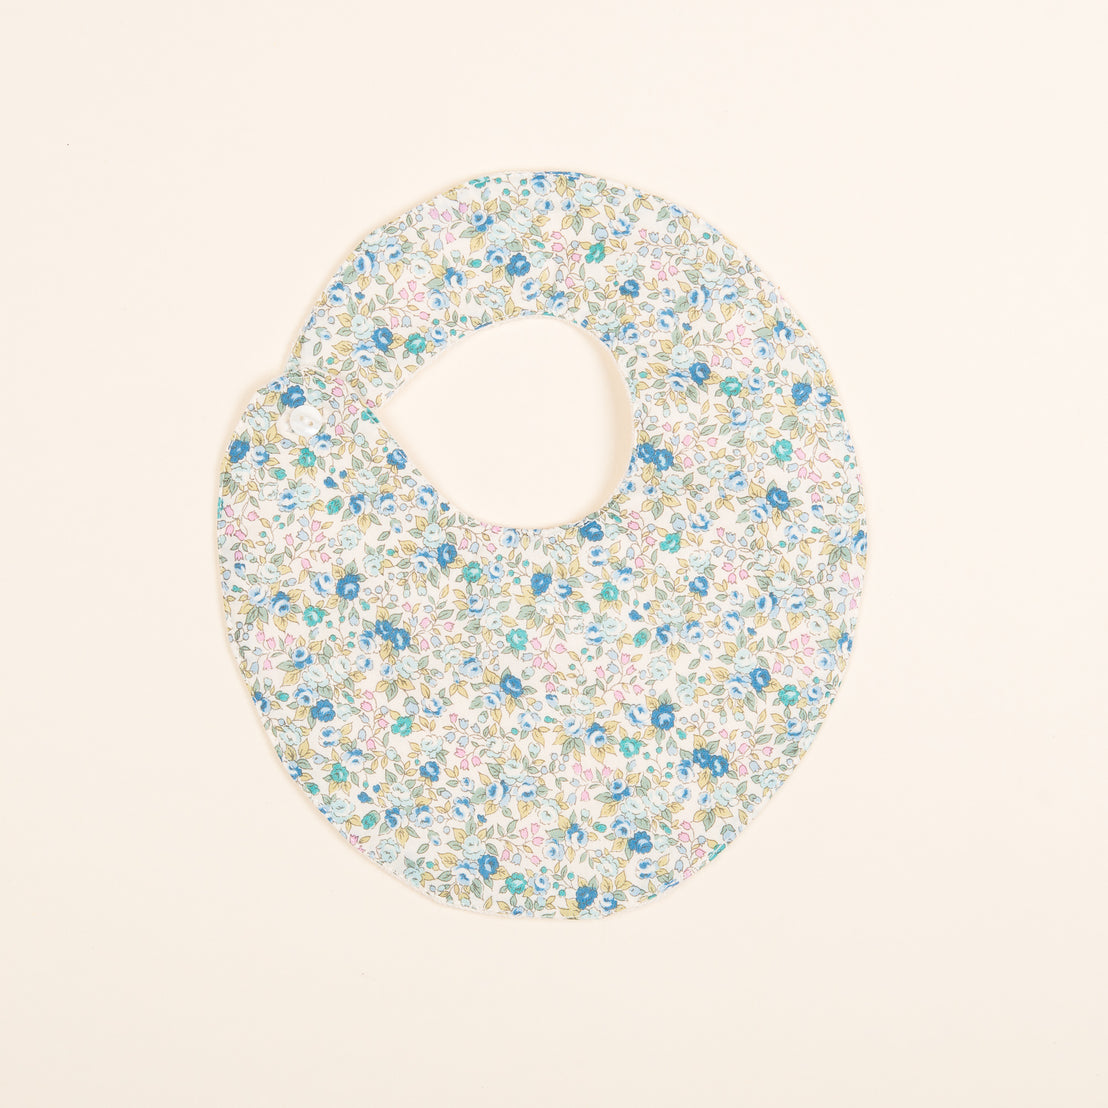 A round, heirloom Petite Fleur Bib with a cutout neck hole, featuring a small, intricate floral pattern in multiple colors on a neutral background.